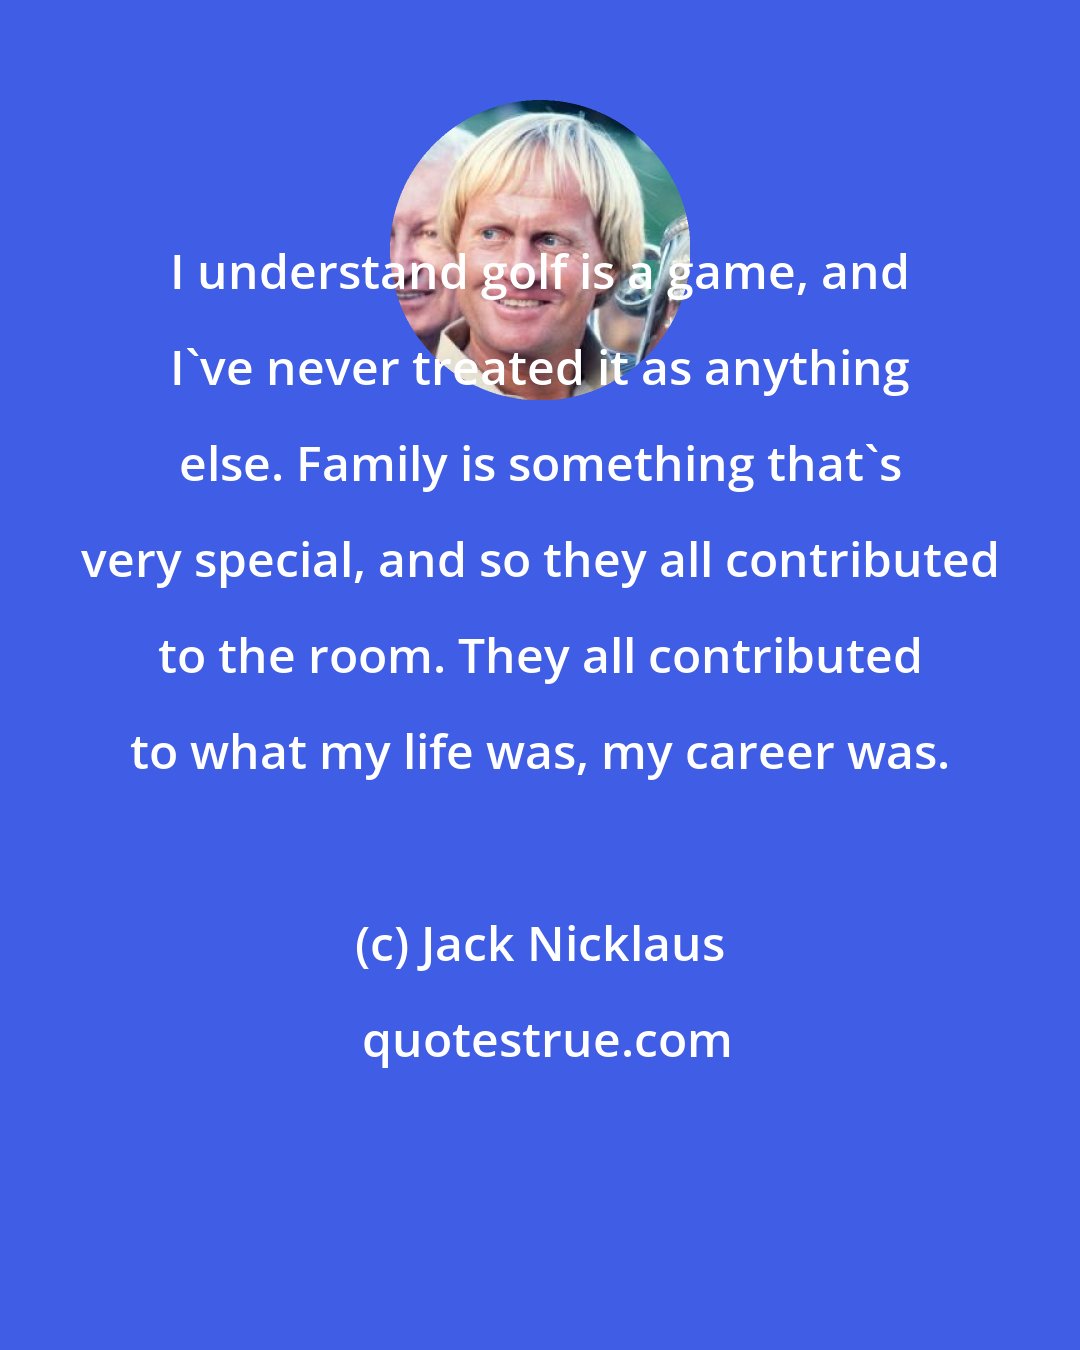 Jack Nicklaus: I understand golf is a game, and I've never treated it as anything else. Family is something that's very special, and so they all contributed to the room. They all contributed to what my life was, my career was.